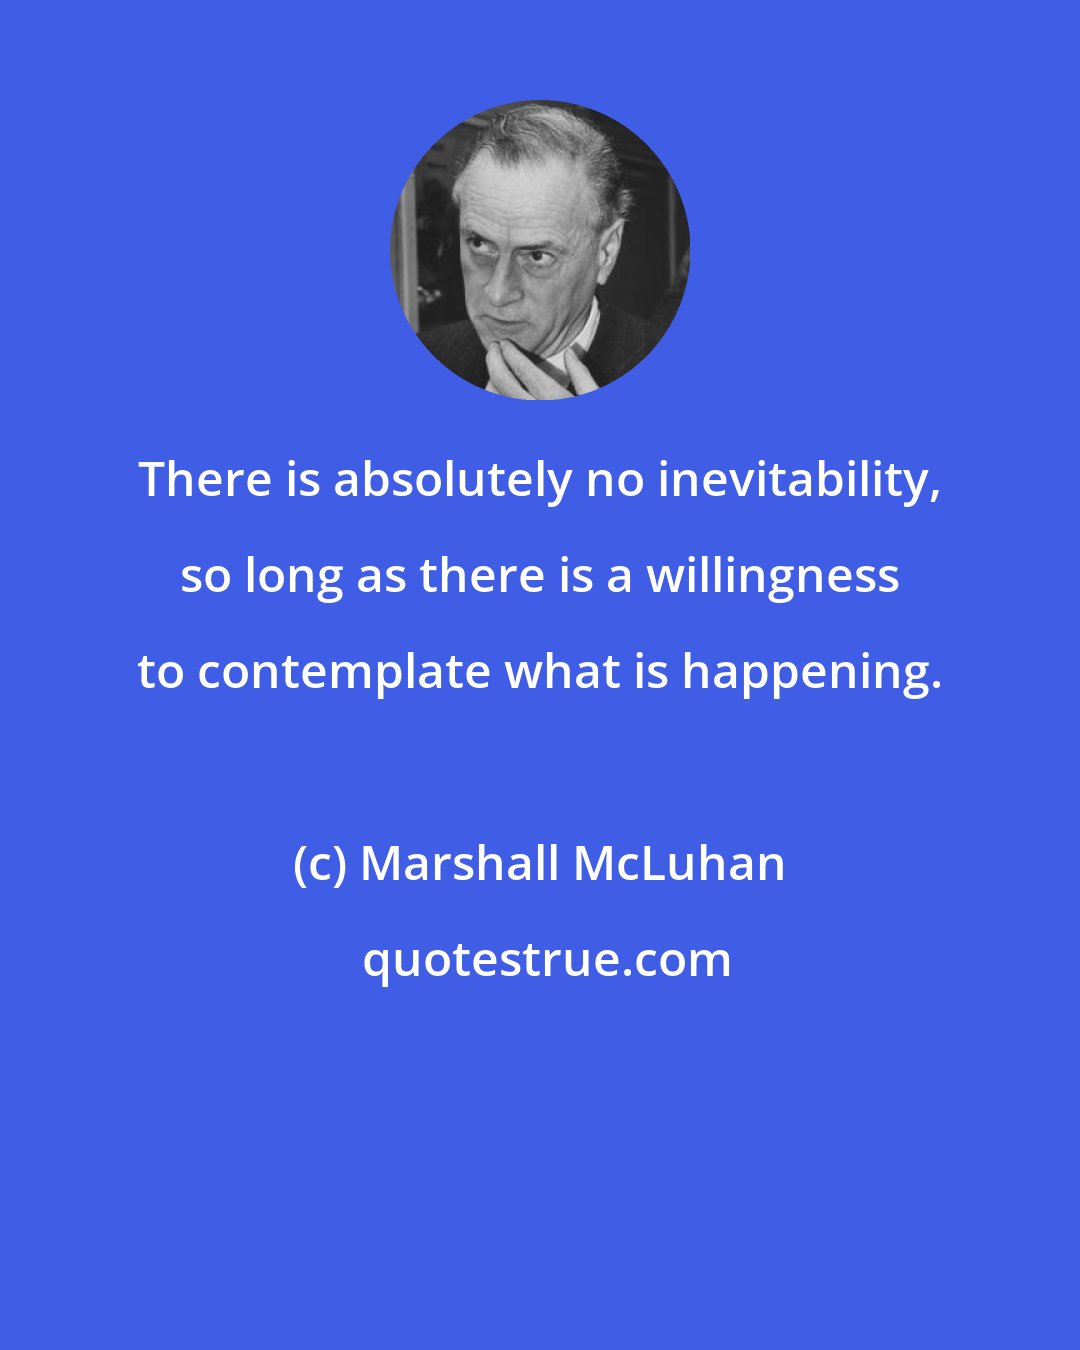 Marshall McLuhan: There is absolutely no inevitability, so long as there is a willingness to contemplate what is happening.